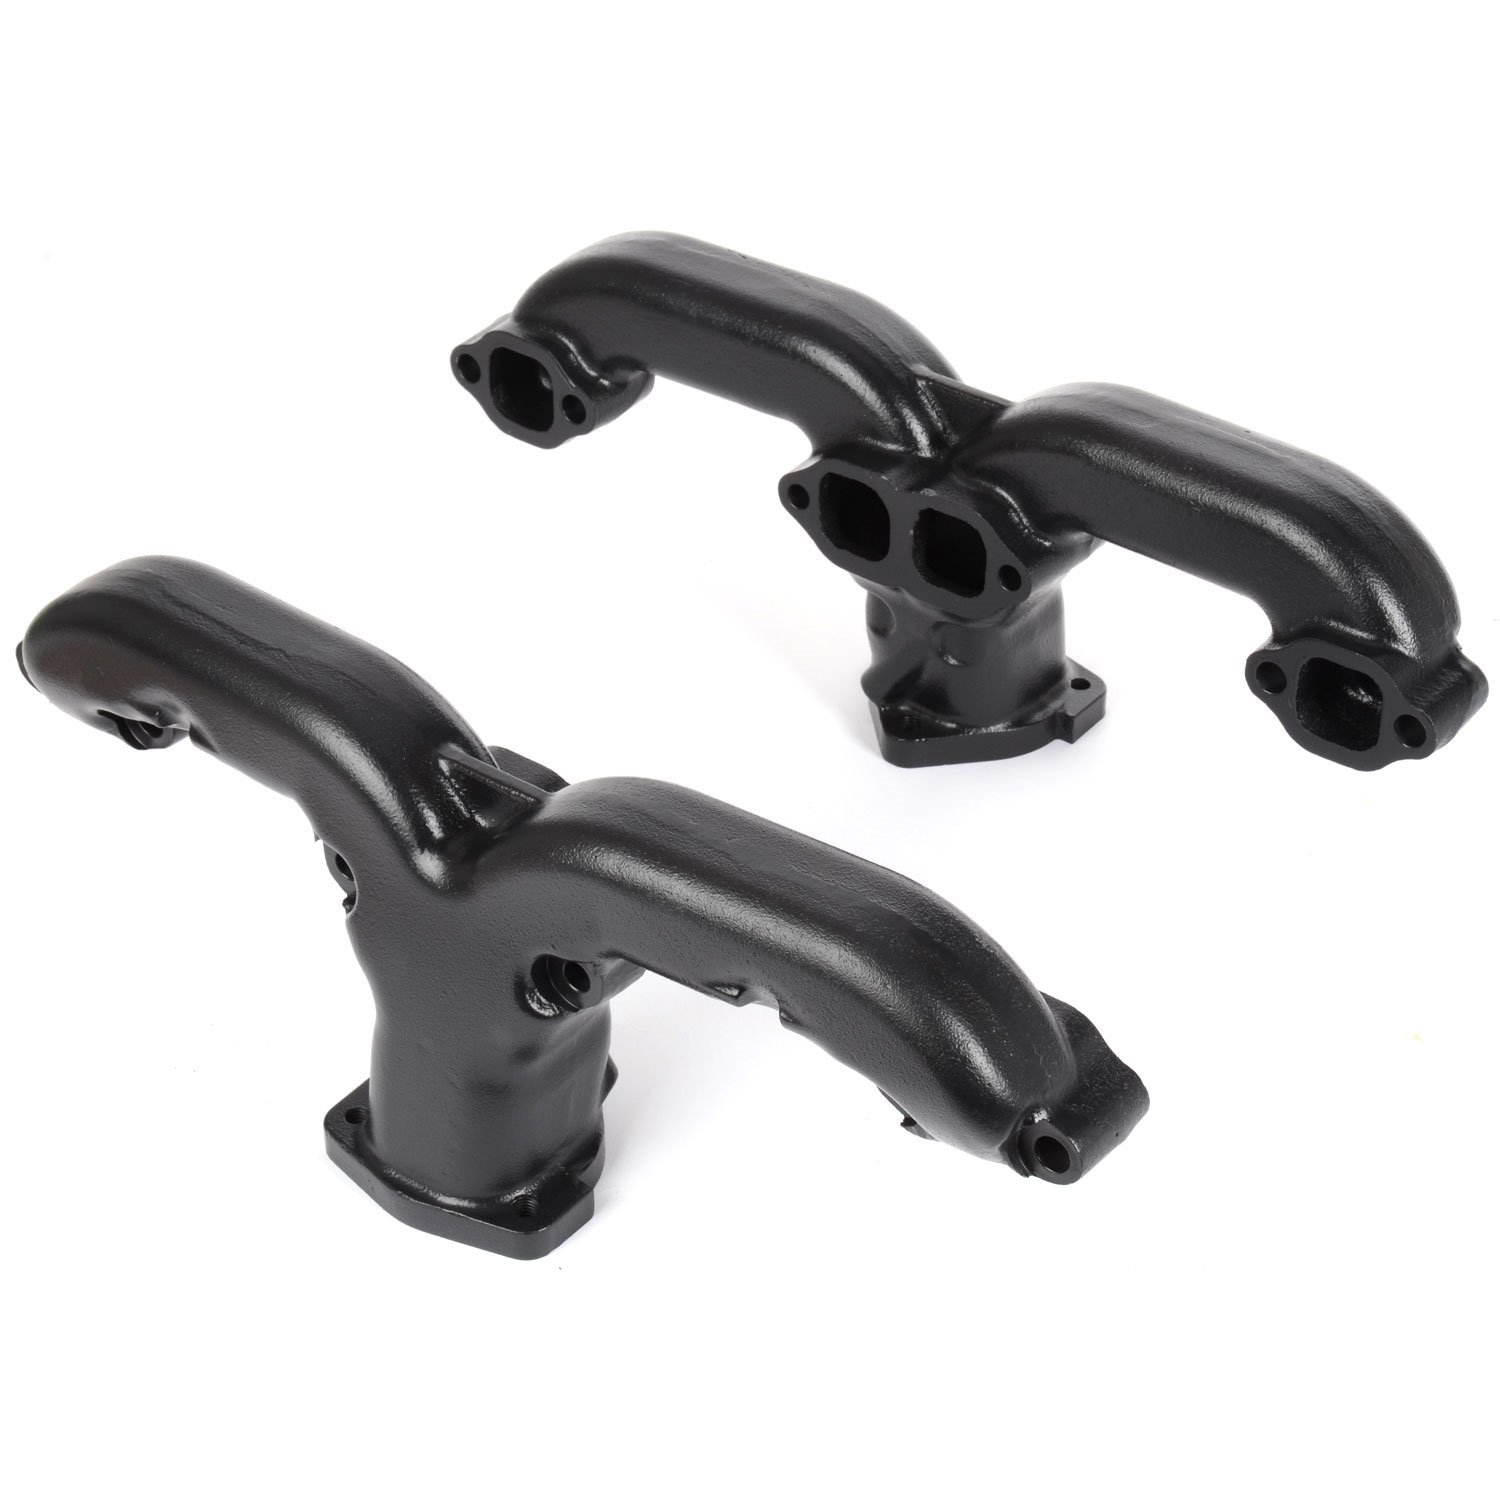 Black Ceramic Coated Rams Horn Style Exhaust Manifolds Fits Most Round/Square Port Small Block Chevy Stock Cylinder Heads